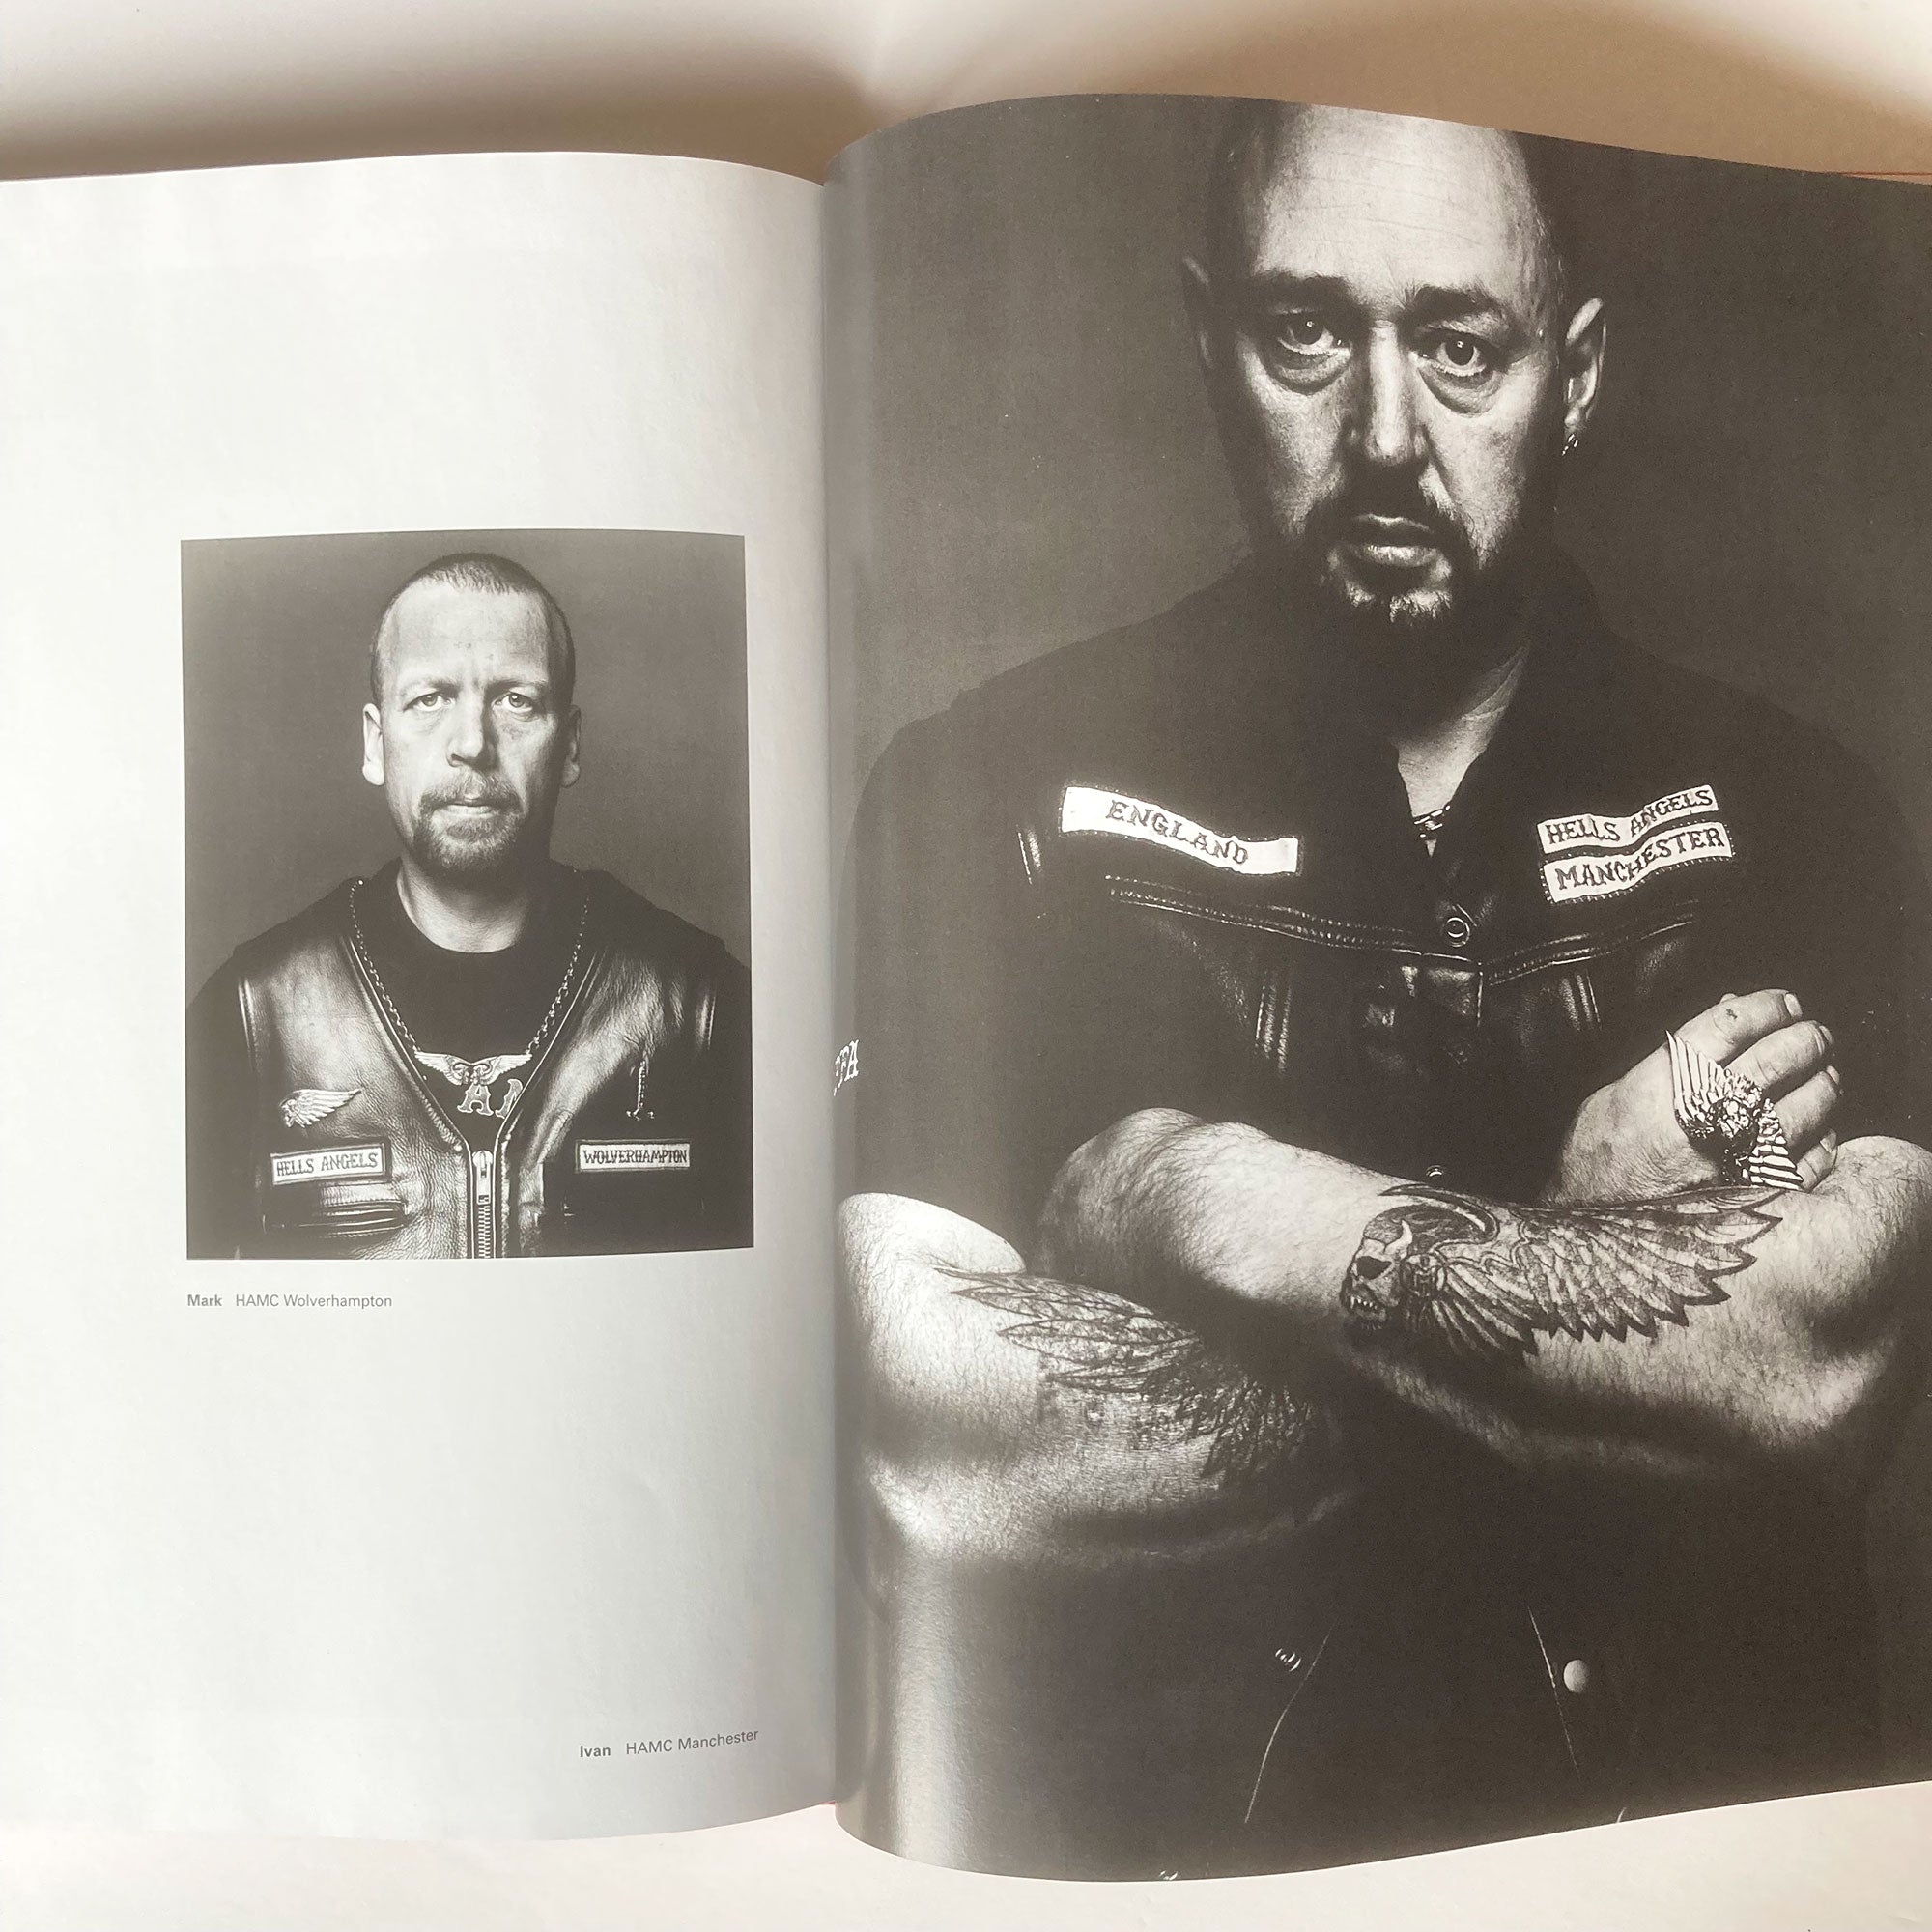 Hells Angels Motorcycle Club by Andrew Shaylor, signed by Sonny Barger